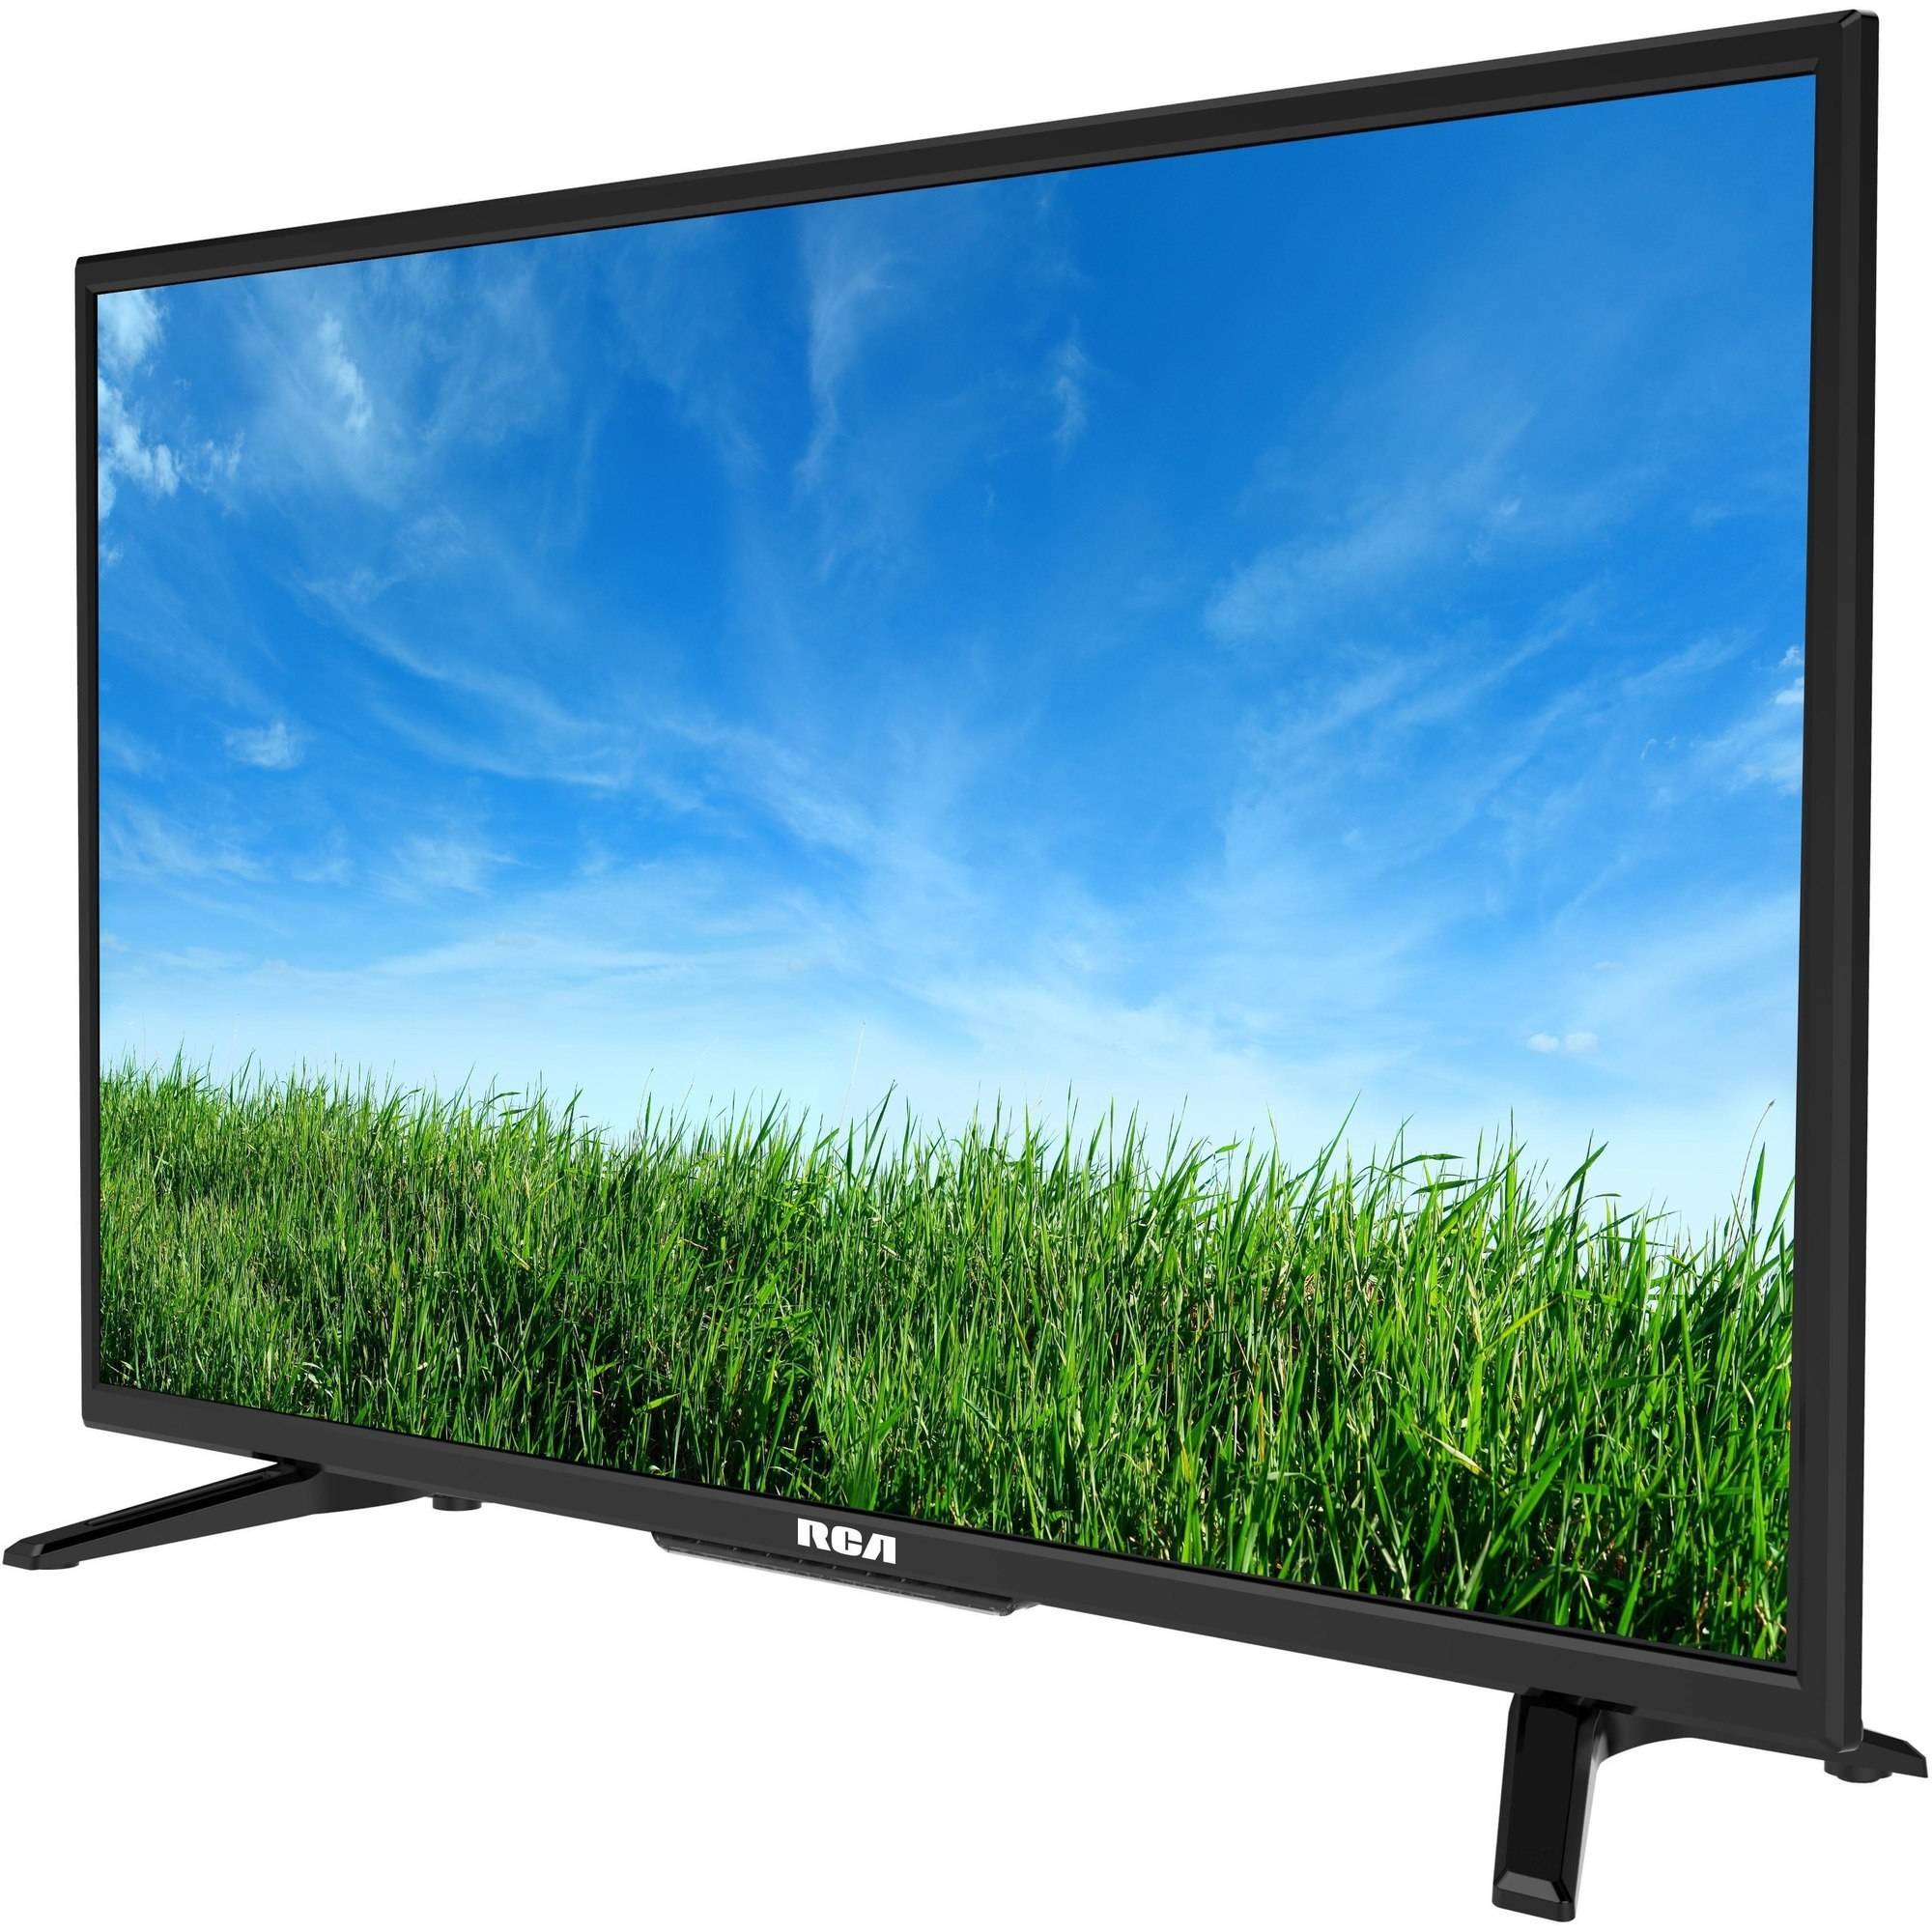 RCA 32" Class HD (720P) LED TV with Built-in DVD Player (RLDEDV3255-A) - image 4 of 8